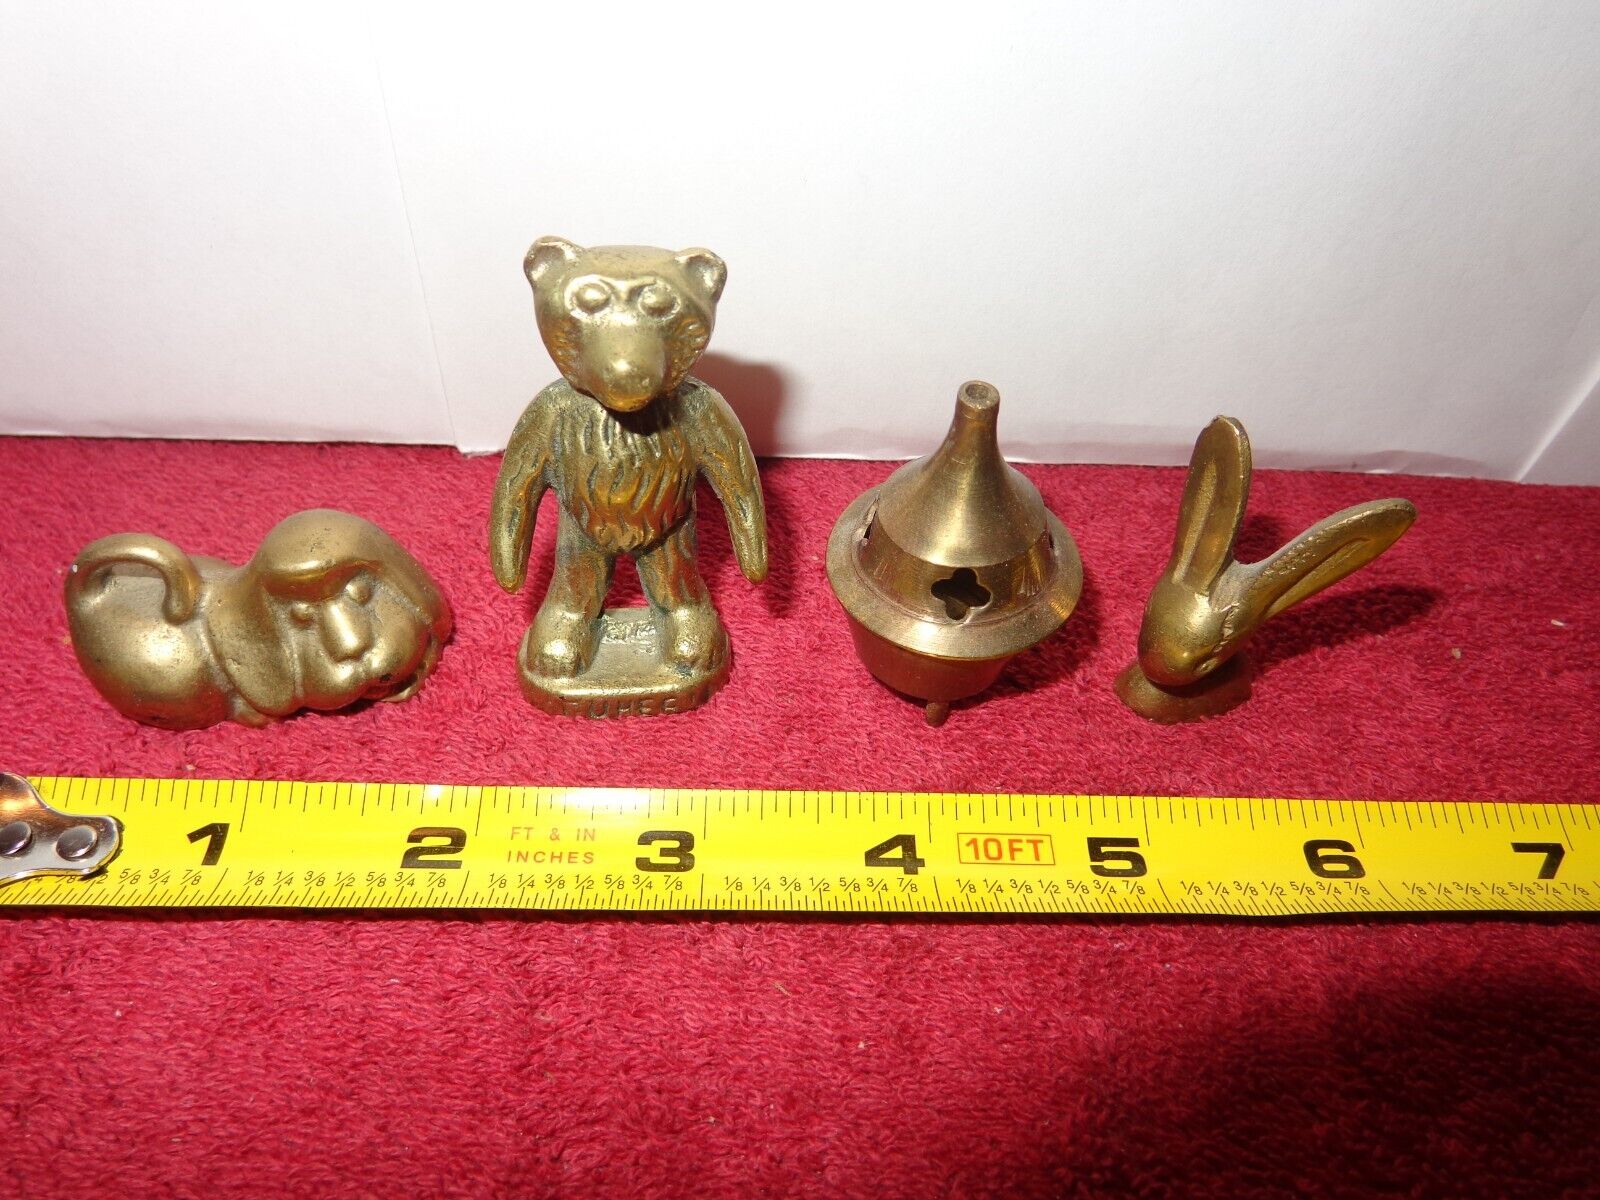 4 ANTIQUE FIGURES HEAVY SOLID BRASS VERY UNIQUE DISPLAY PIECES GREAT DEAL #Z 203